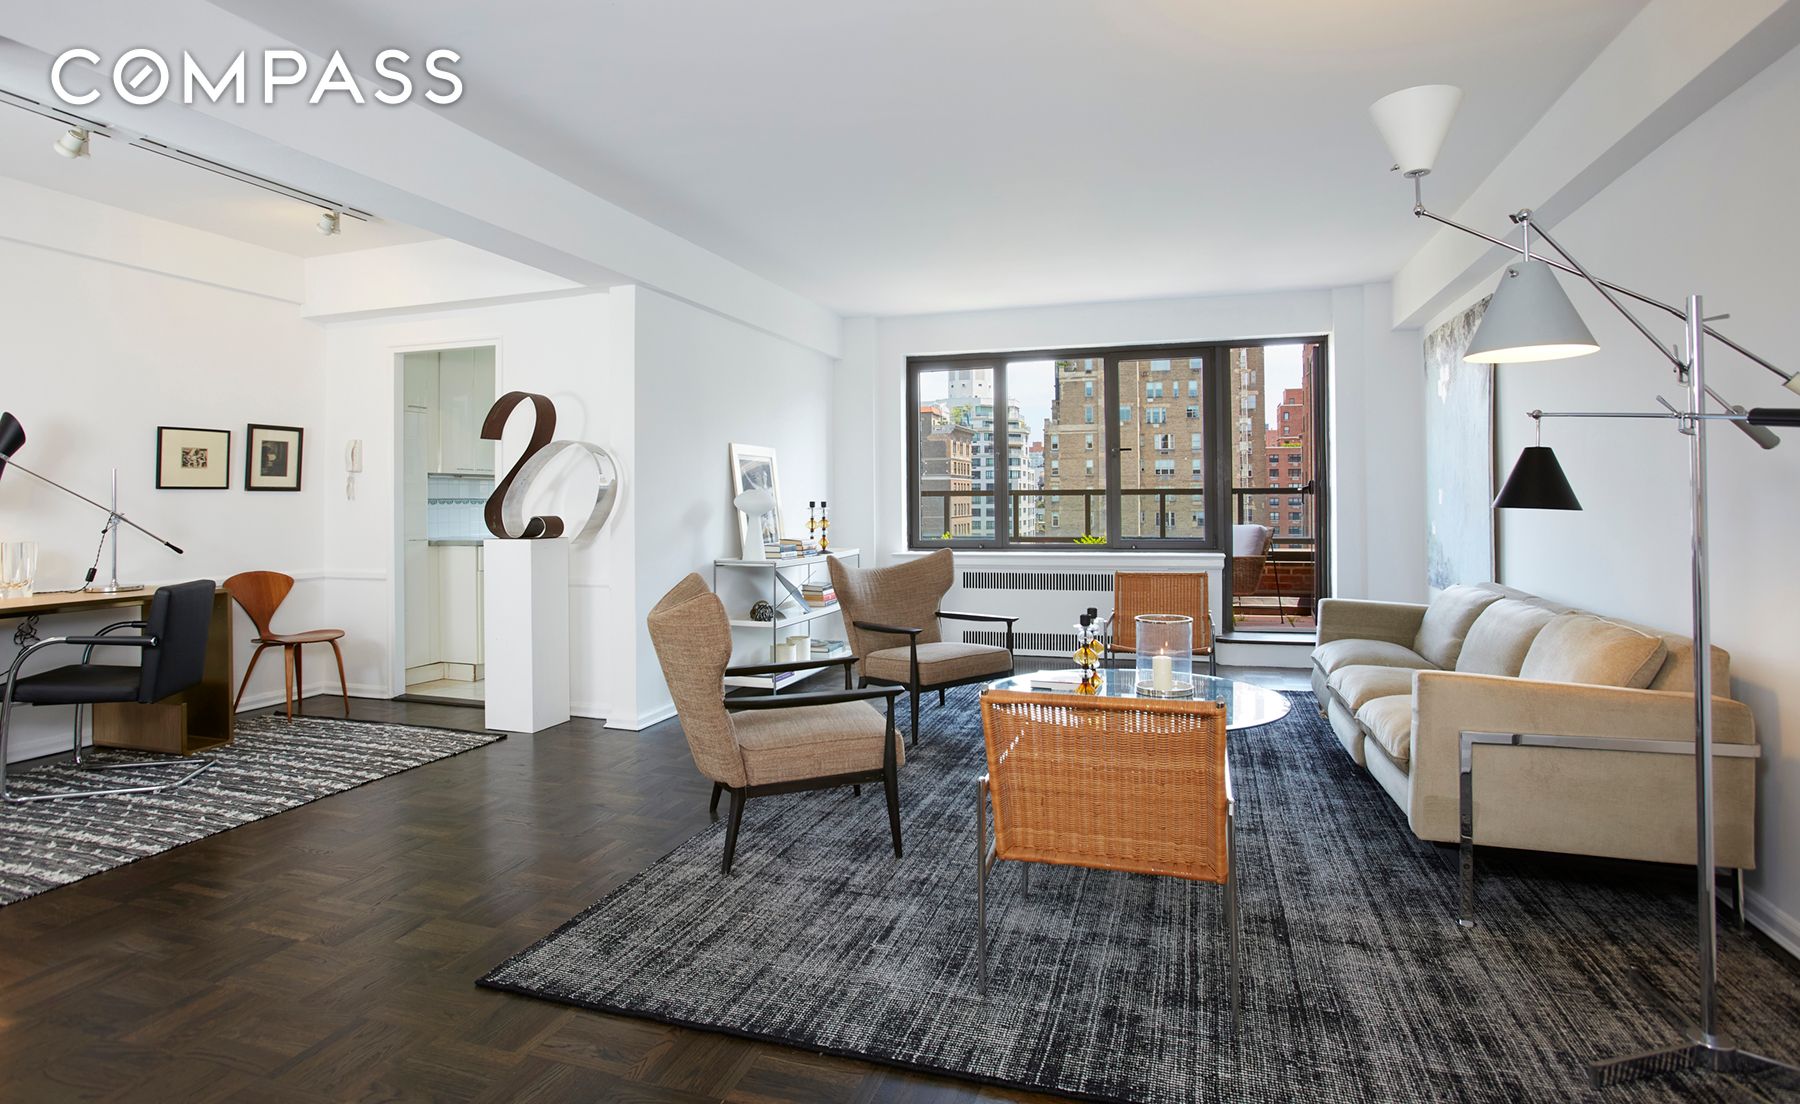 20 East 74th Street 14-A Upper East Side New York NY 10021